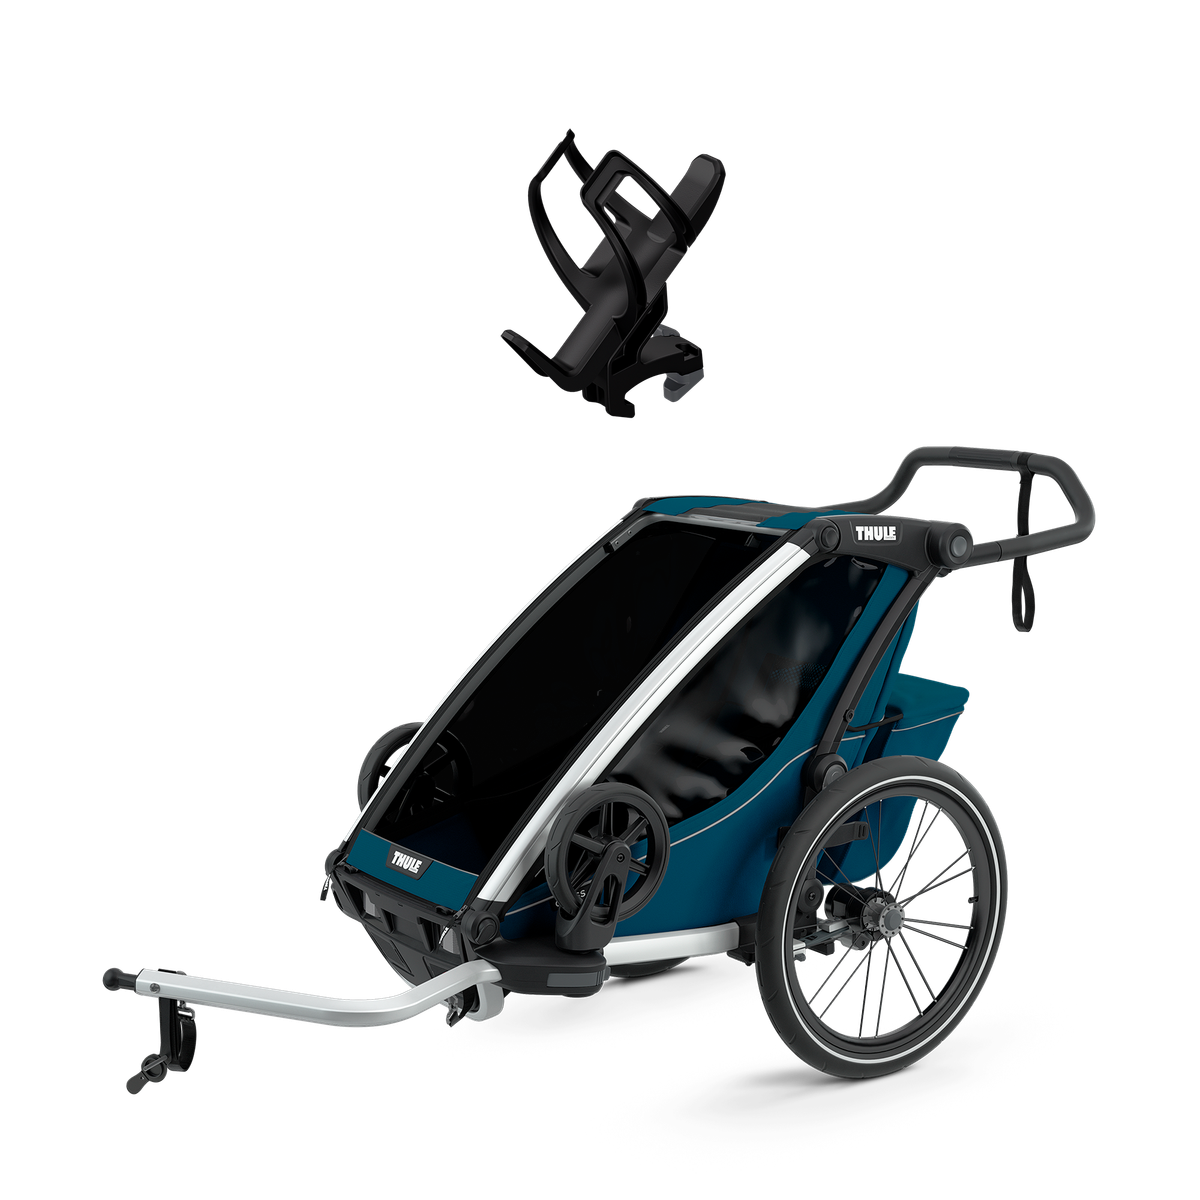 Thule Chariot Cross 1 + Thule Bottle Cage - Majolica Blue